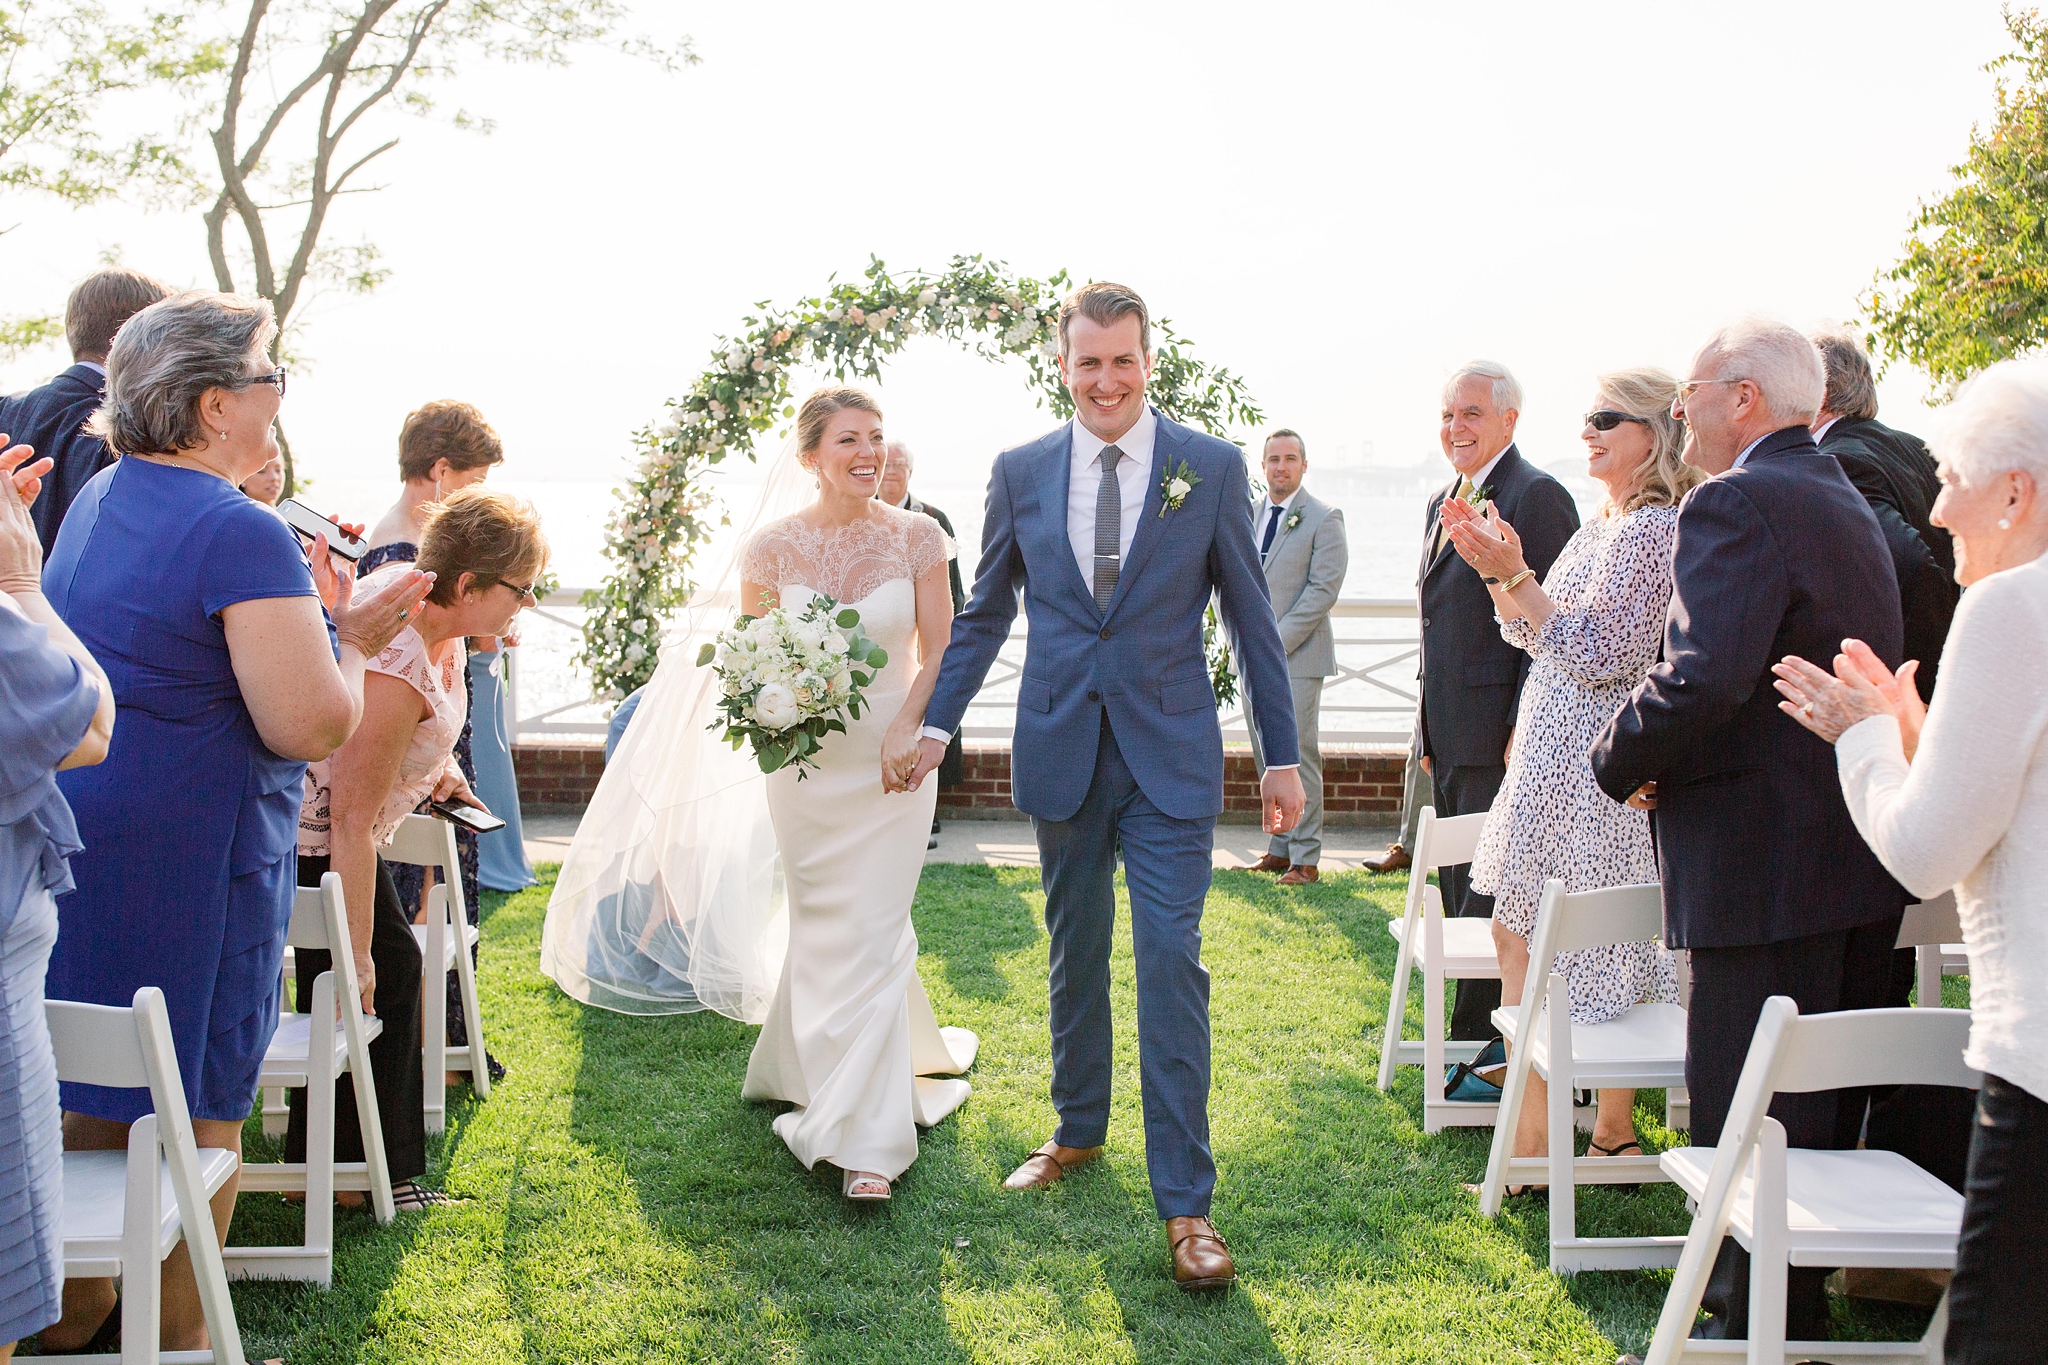 Be sure to avoid these five mistakes when planning your outdoor wedding to ensure a stunning, fun-filled day!